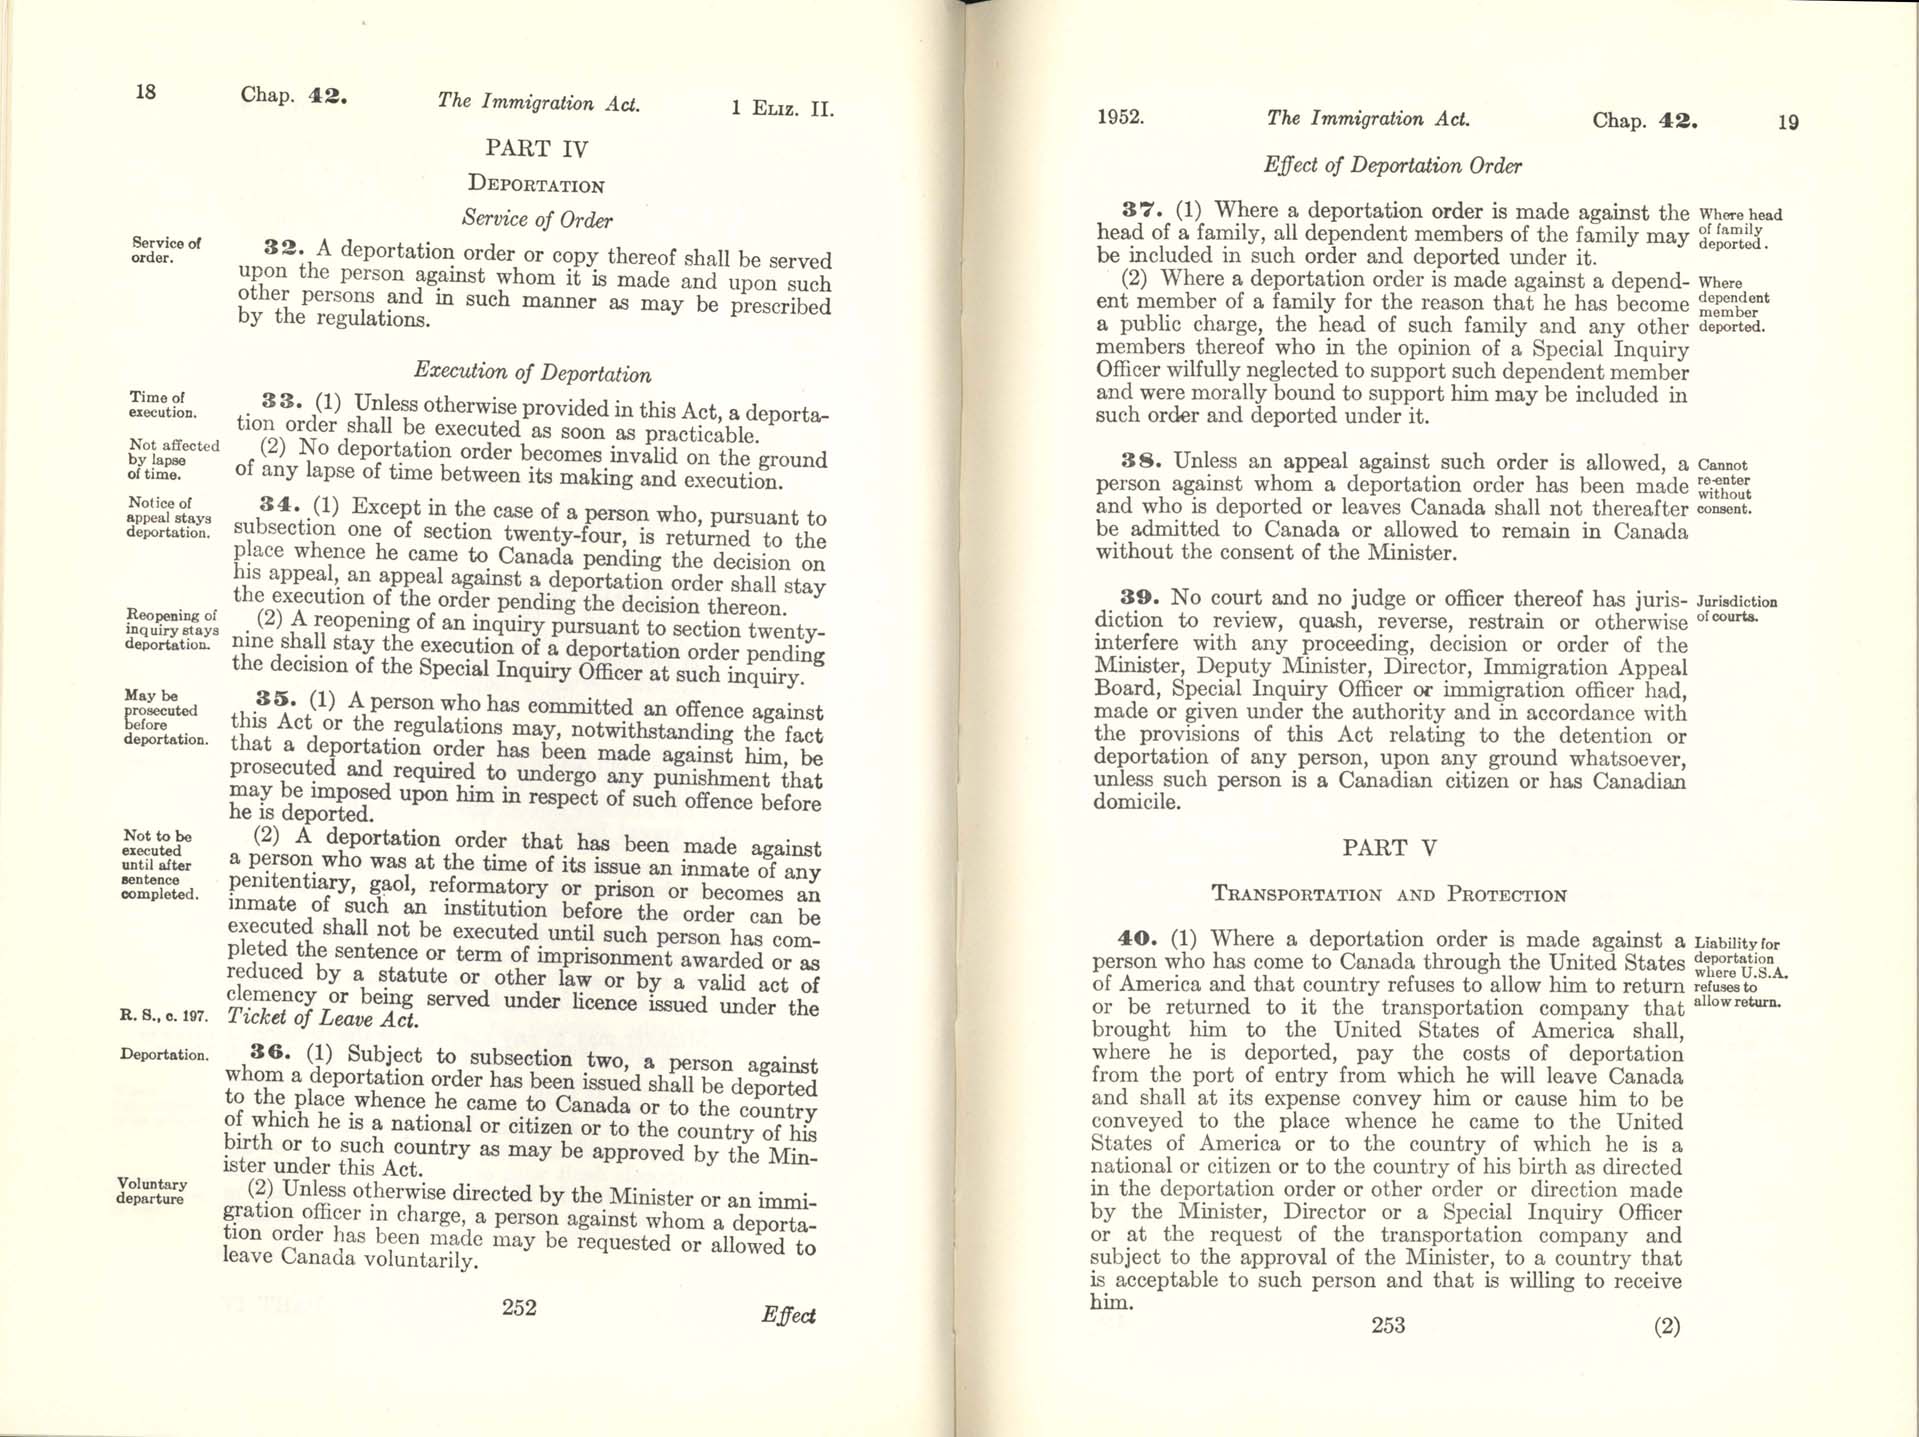 CHAP 42 Page 252, 253 Immigration Act, 1952